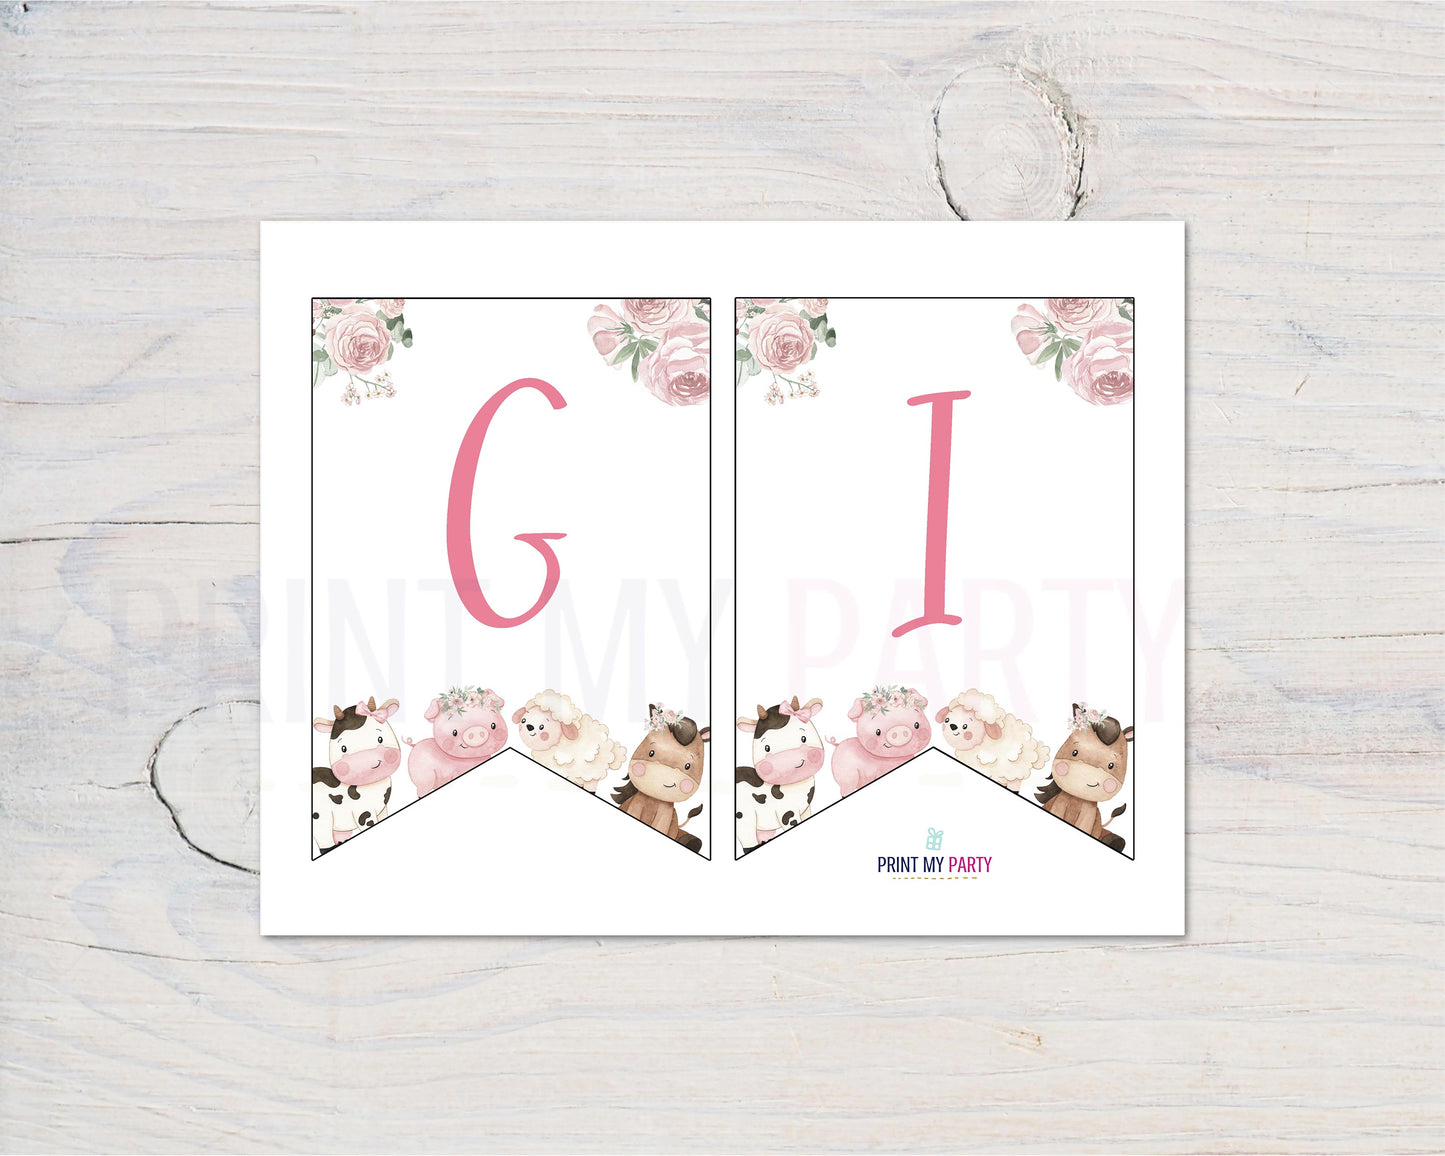 Floral Farm It's A Girl Banner | Barnyard Girl Baby Shower Decorations - 11A